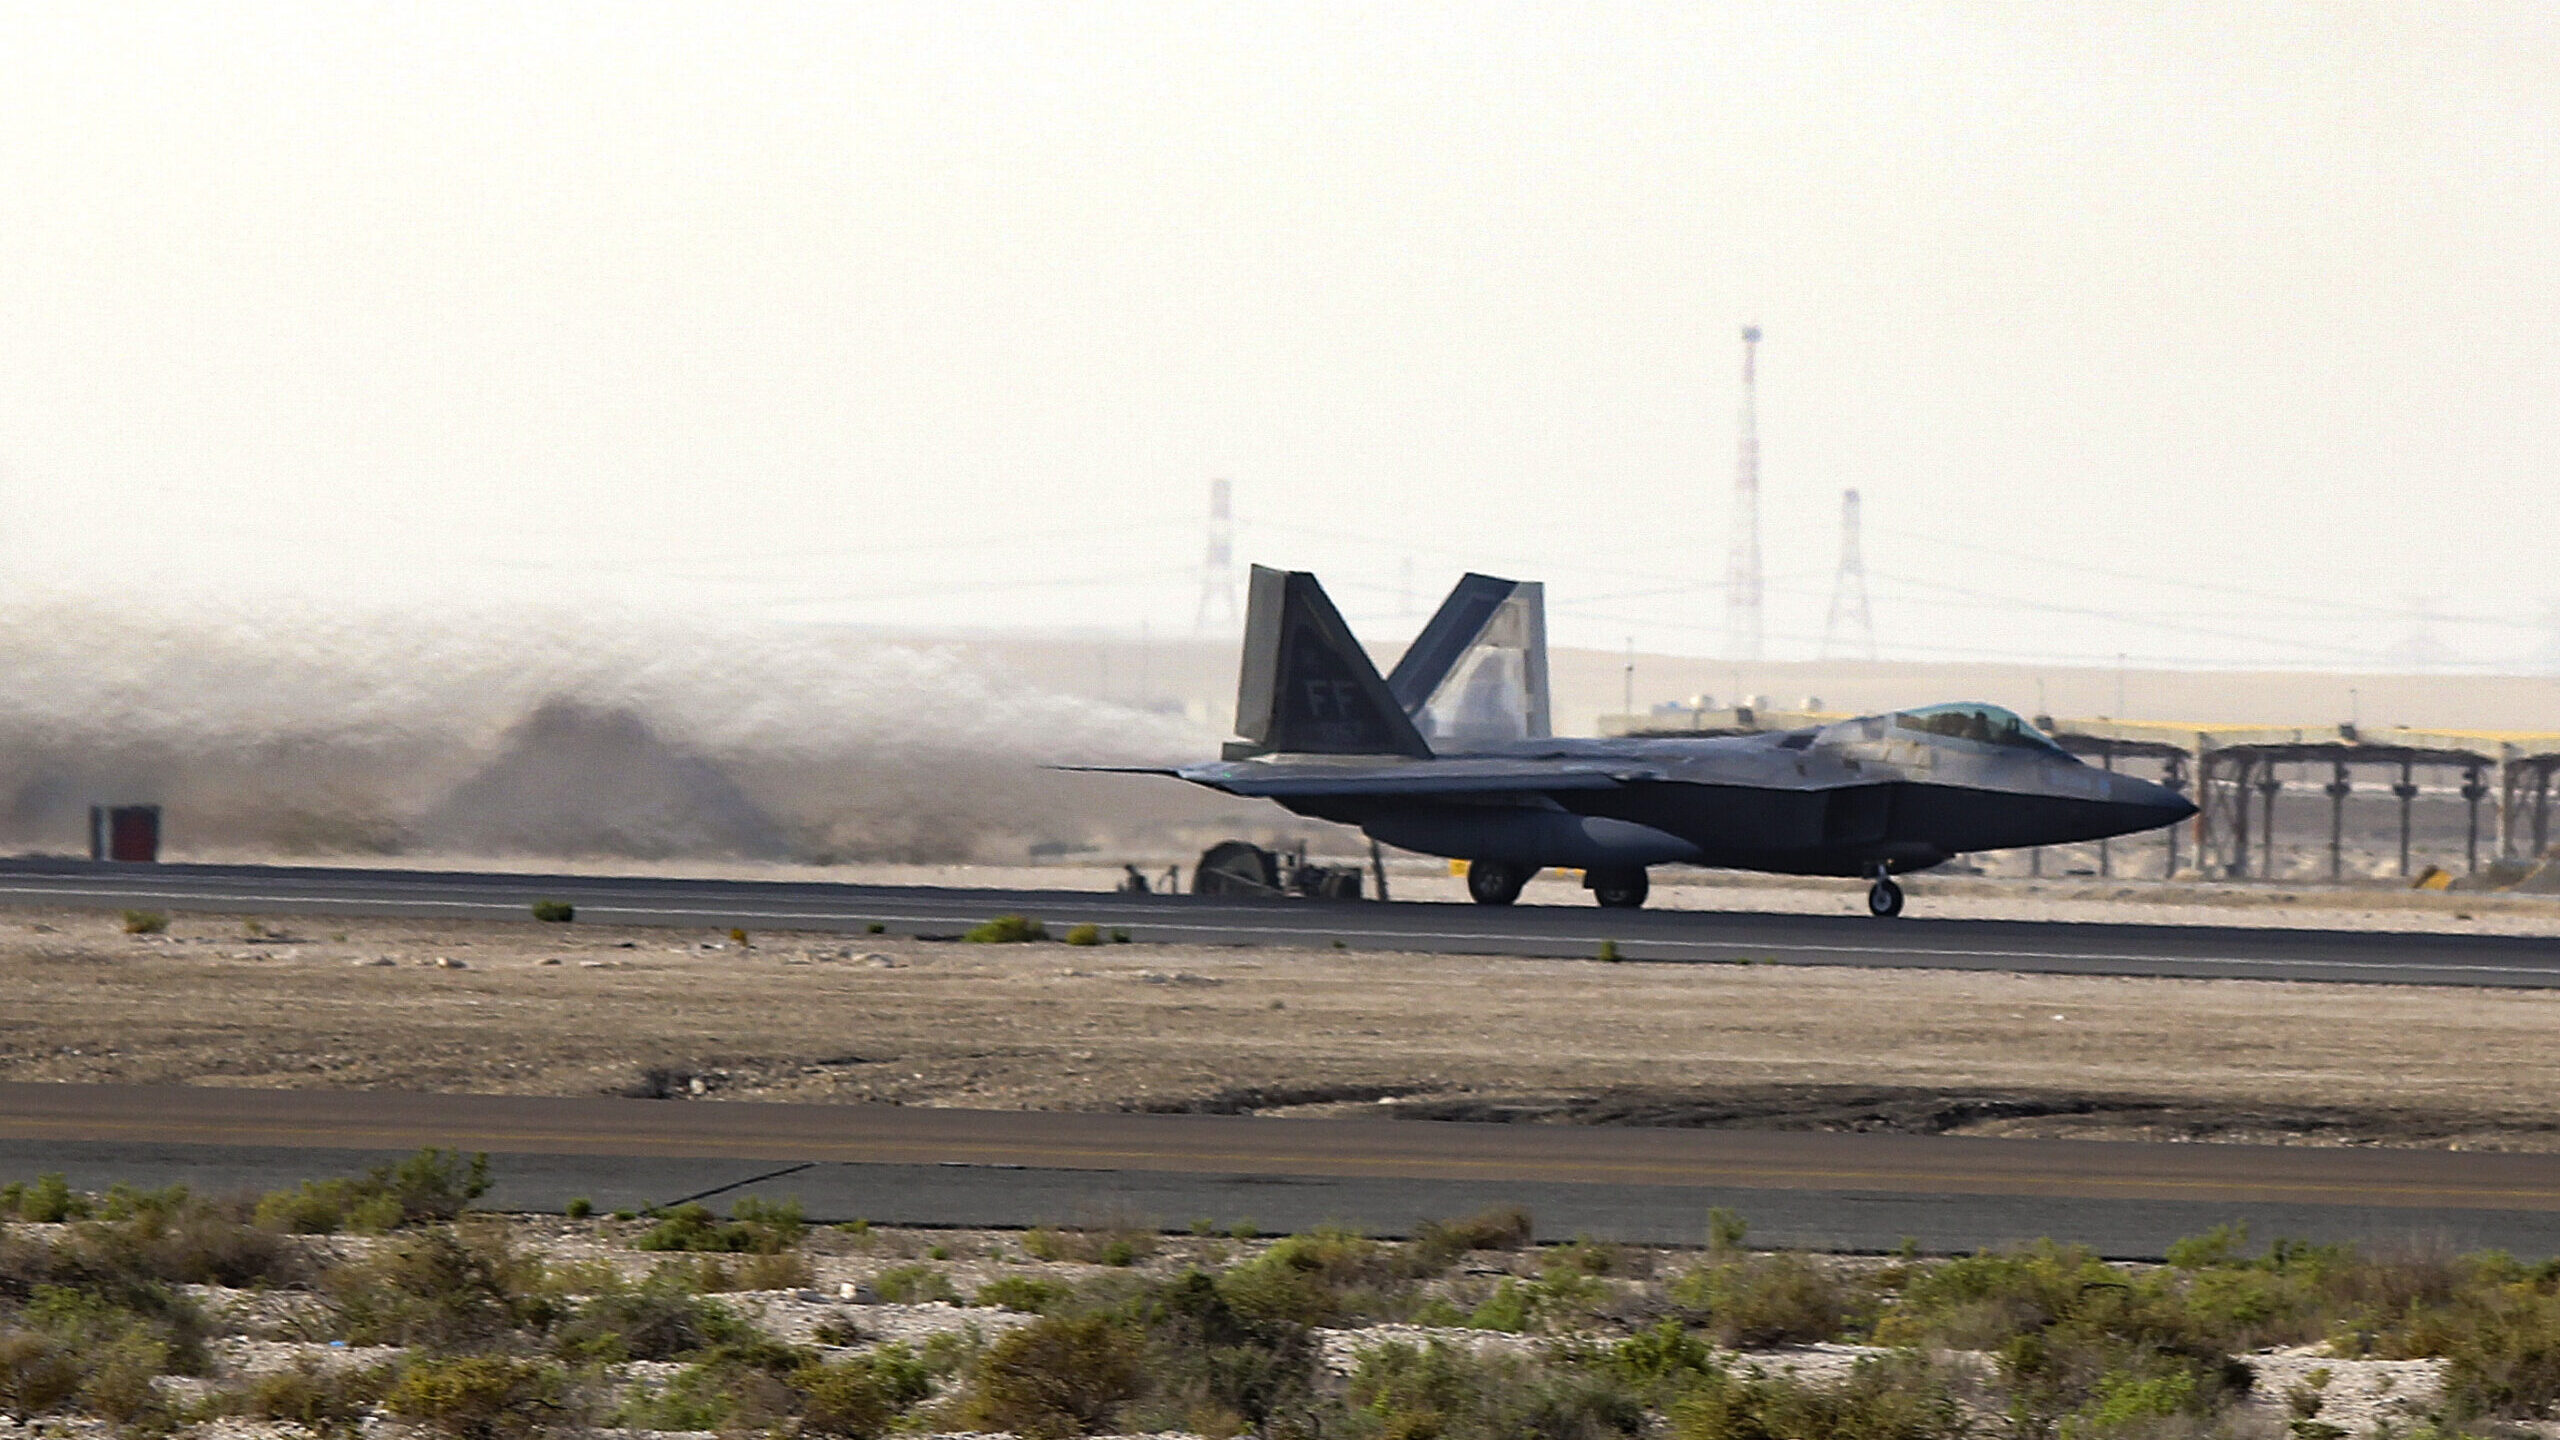 If Congress blocks F-22 retirements, expect impact to Air Force drone programs: Hunter